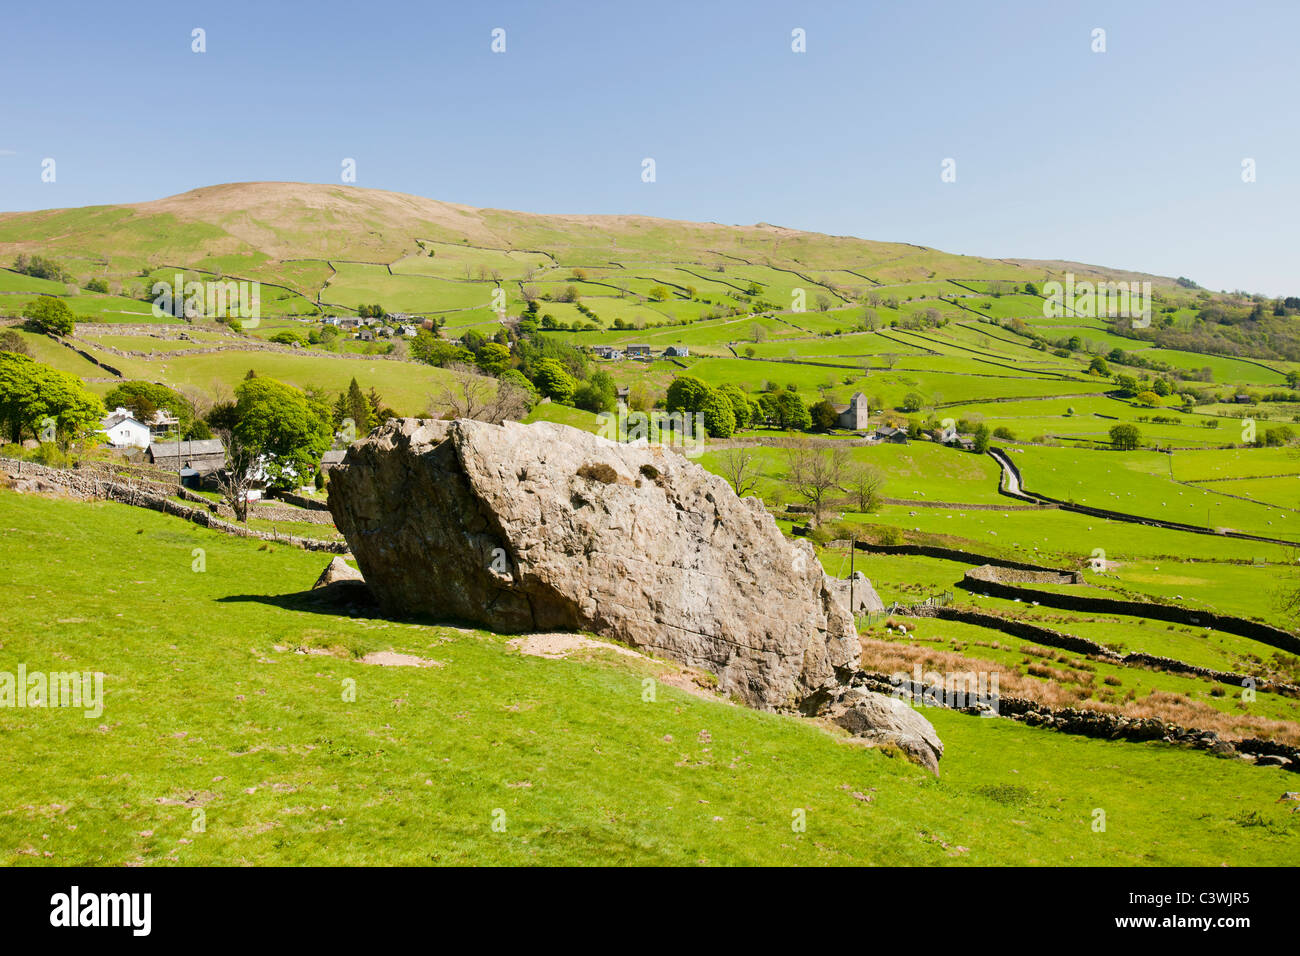 A massive boulder in a field in Kentmere, Lake District, UK. Stock Photo